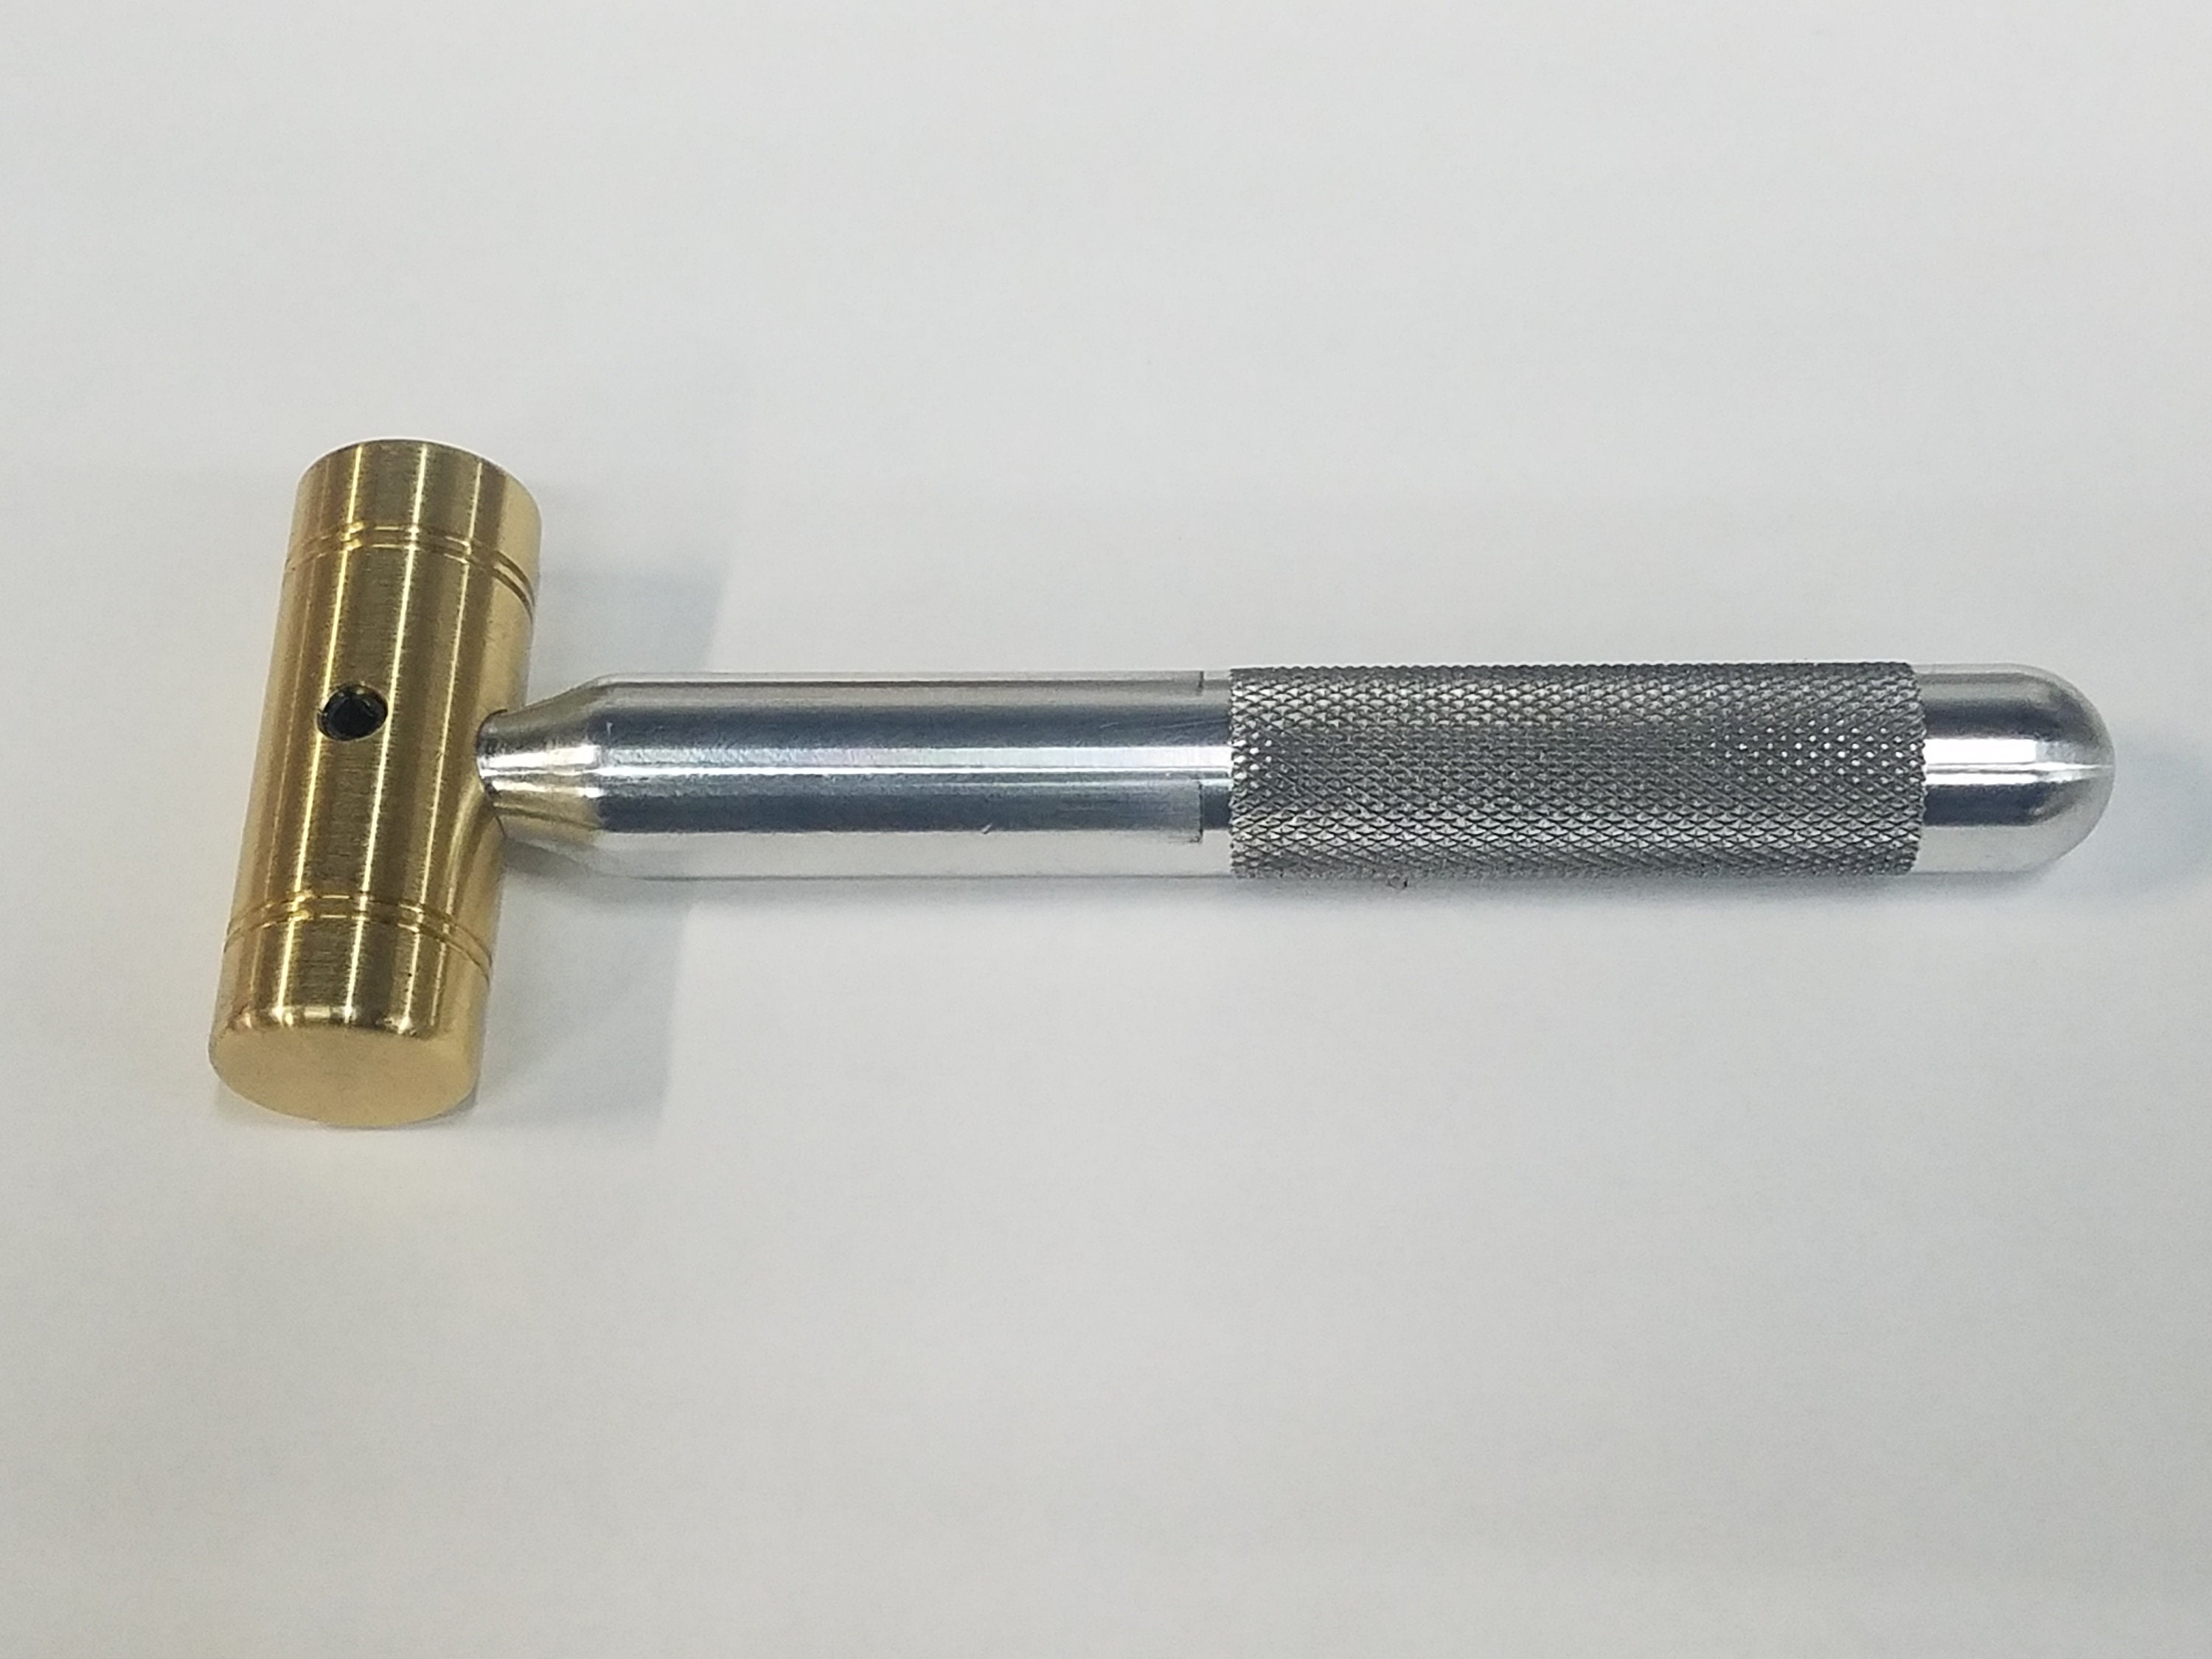 4 OZ. Small Brass Hammer Knurled 5/8 Aluminum Handle Excellent